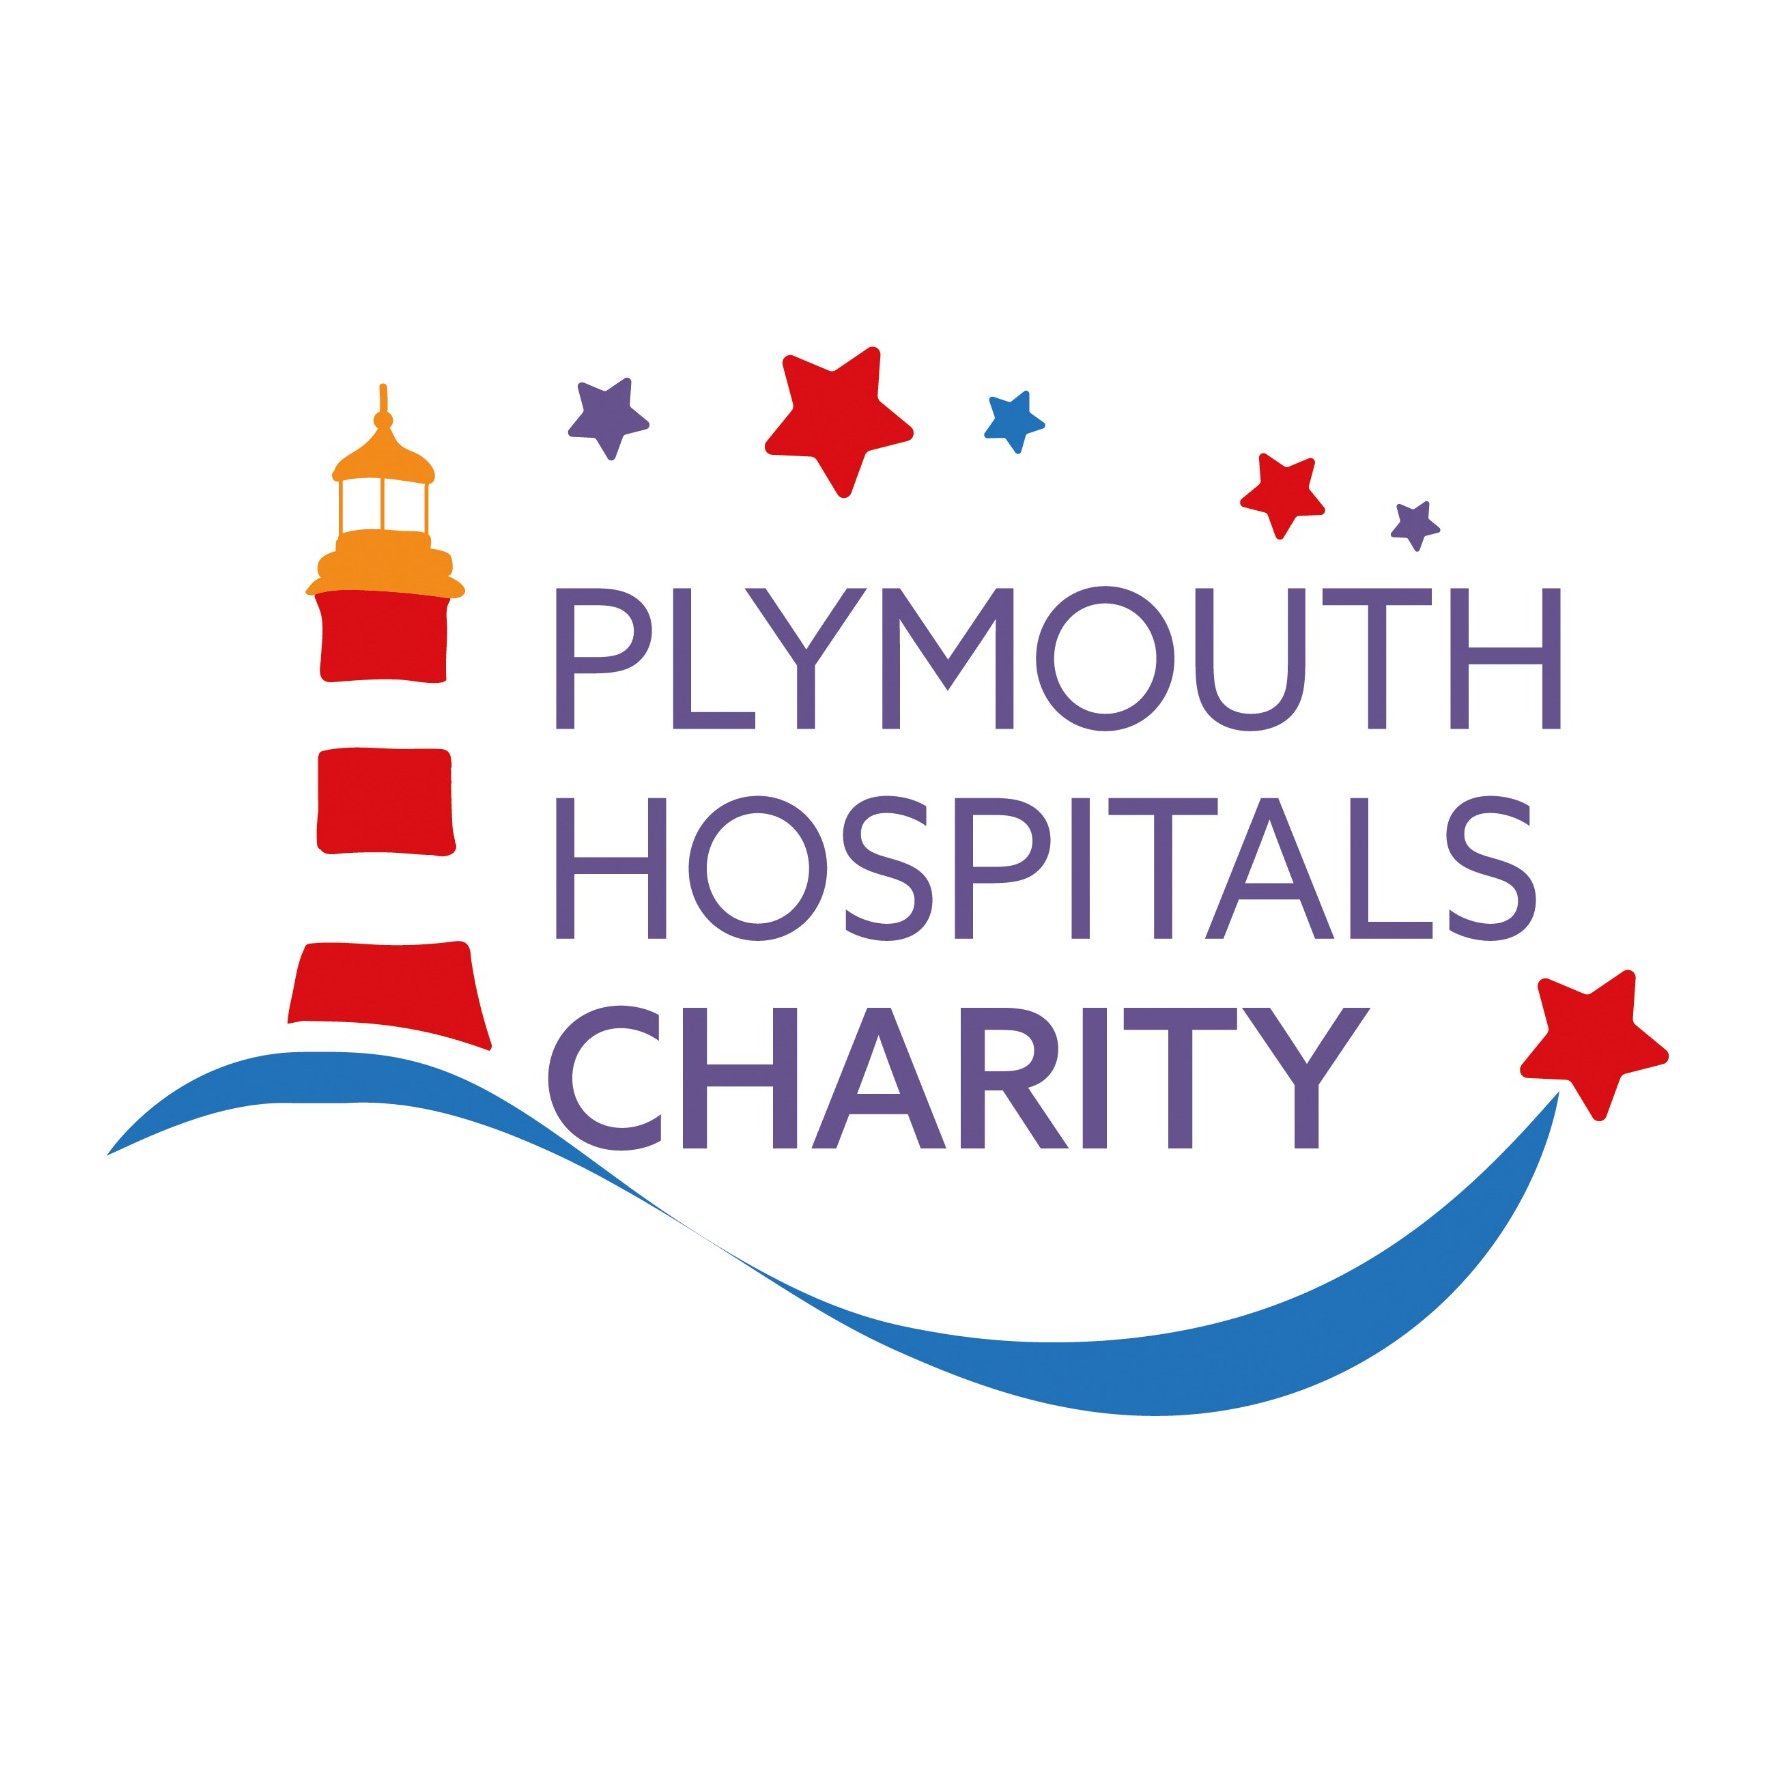 The official NHS charity for University Hospitals Plymouth. Your support helps improve your hospital over and above what NHS funding alone can do. Thank you.